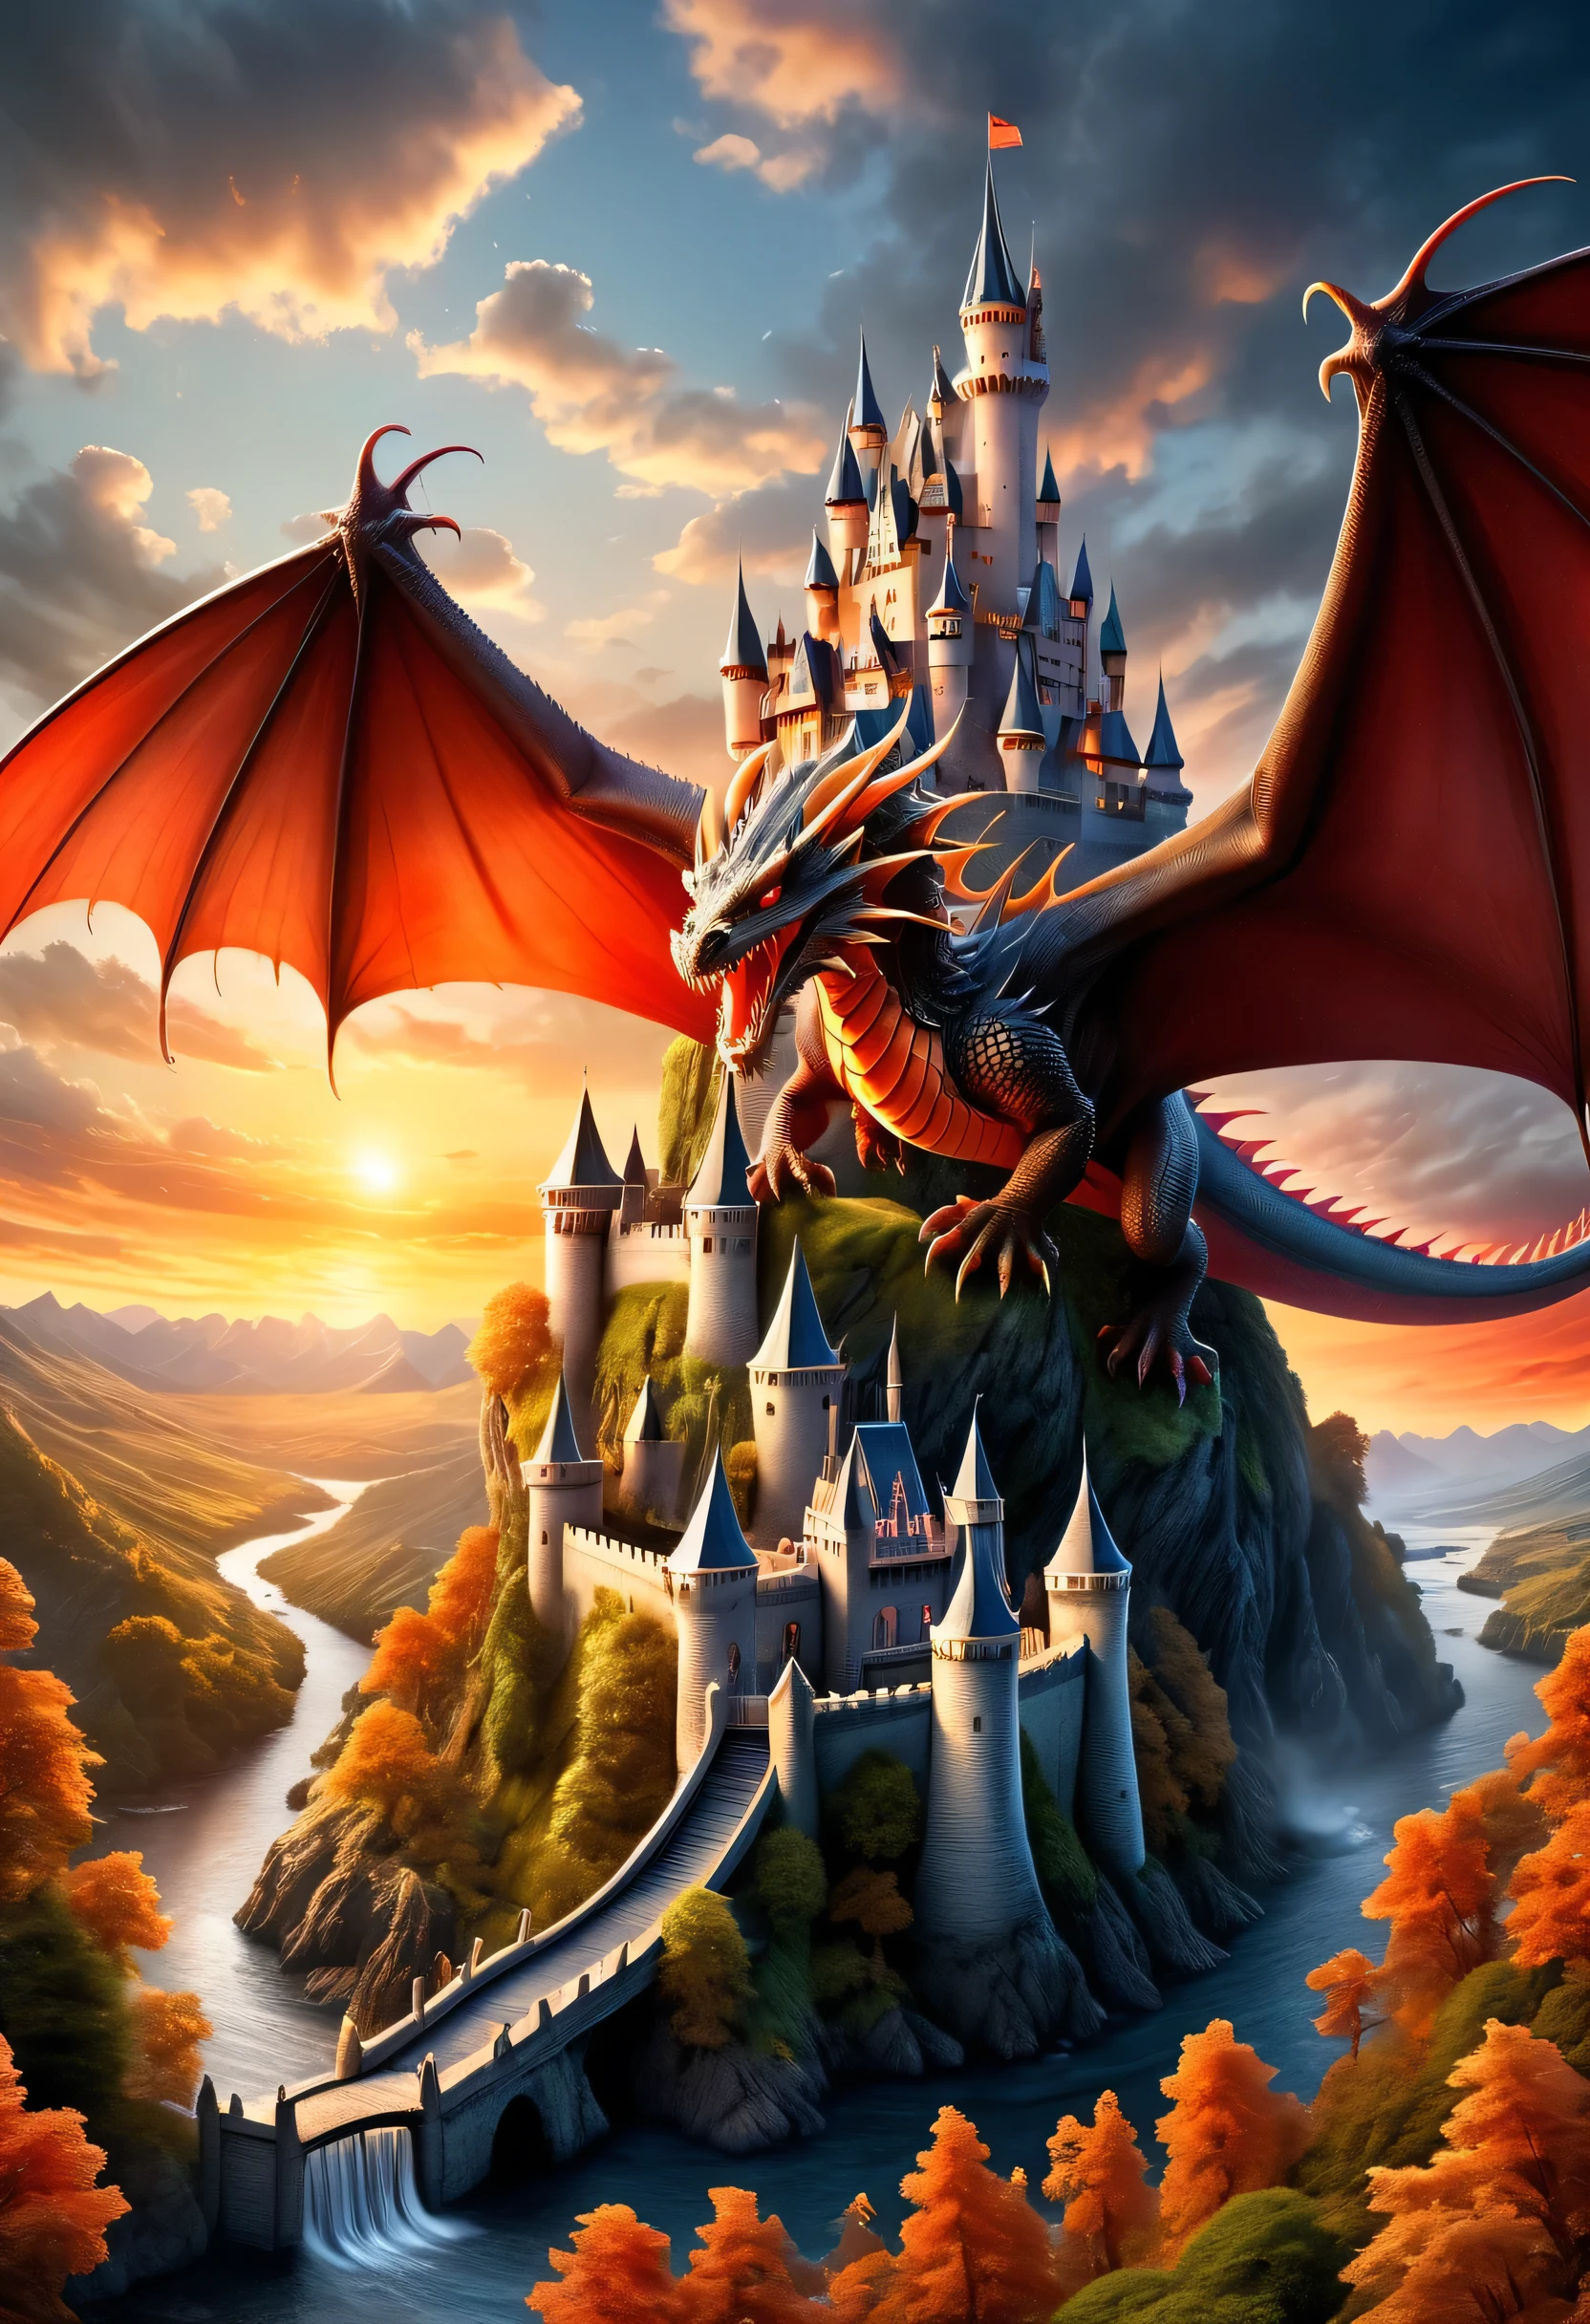 a panoramic award winning photography, Photorealistic, extremely detailed of a (castle: 1.4) being attacked by a dragon, an impressive best detailed castle,  with towers, bridges, a moat filled with lava, standing on top of a mountain, the red dragon flying near the castle threatening it, the sun sets on the castle, , masterpiece, best quality, (extremely detailed), ultra wide shot, photorealism, depth of field, faize